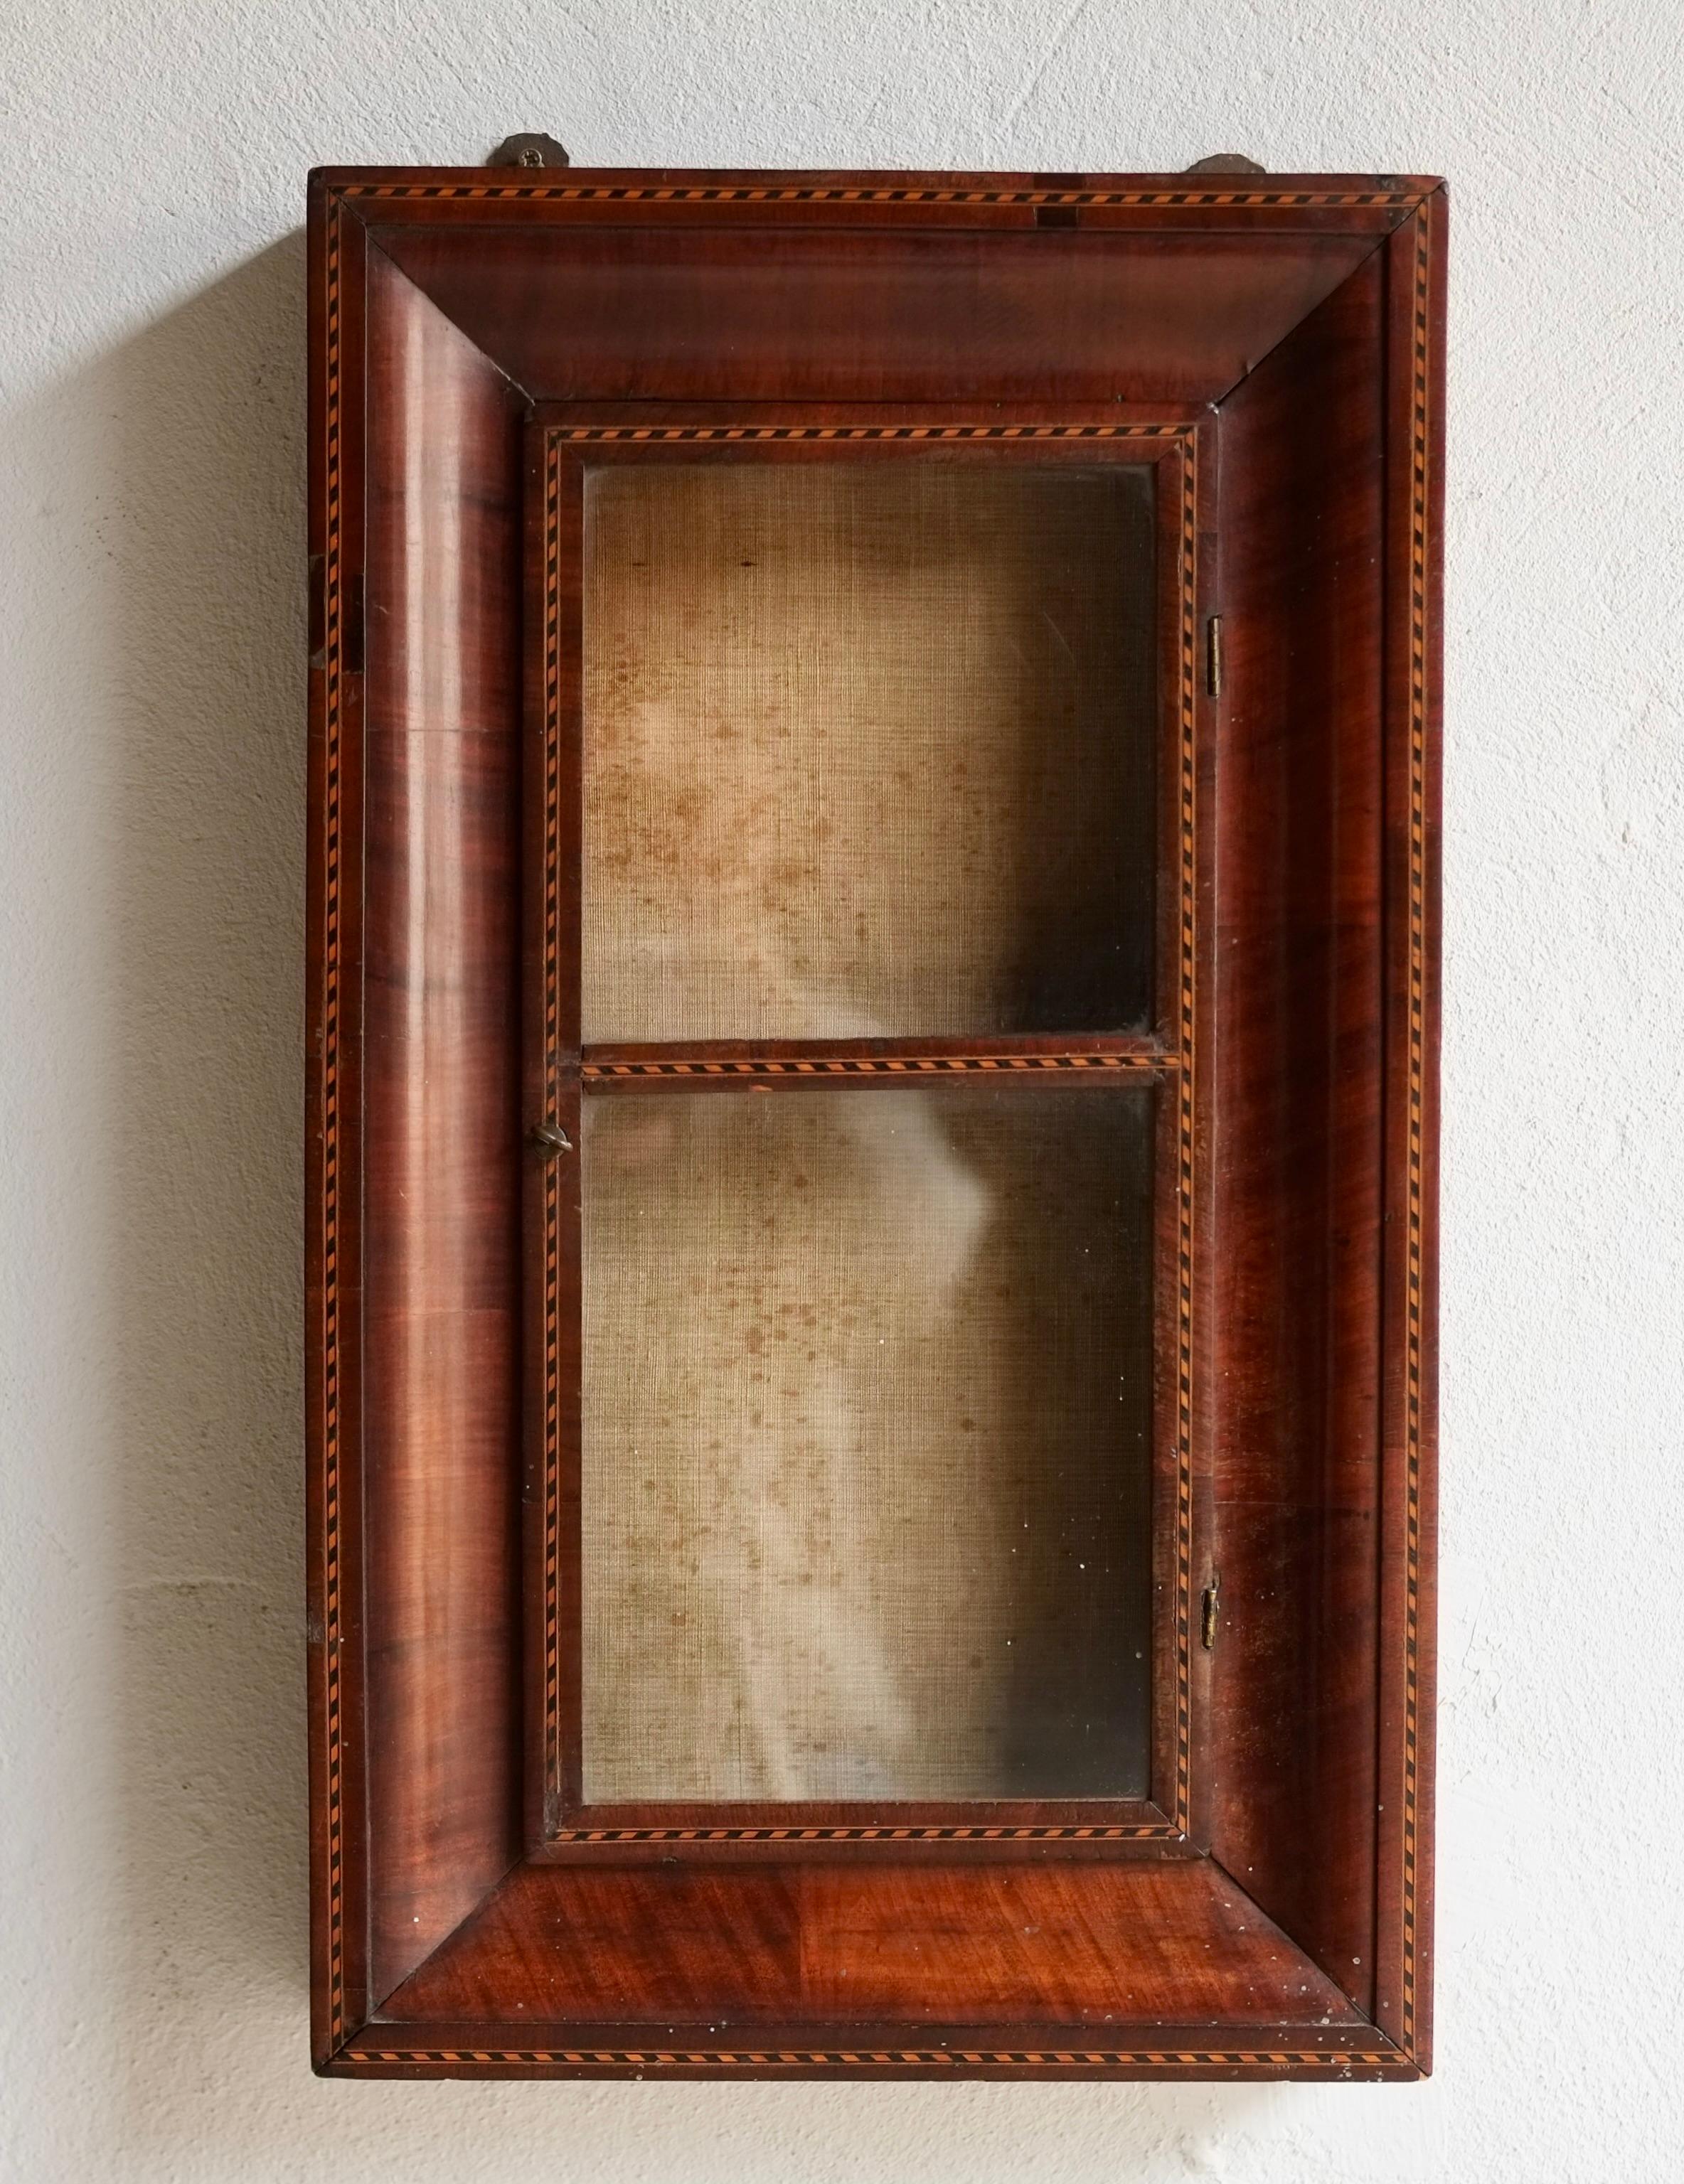 A 19th century French parquetry cabinet with it's original glass door and canvas back.